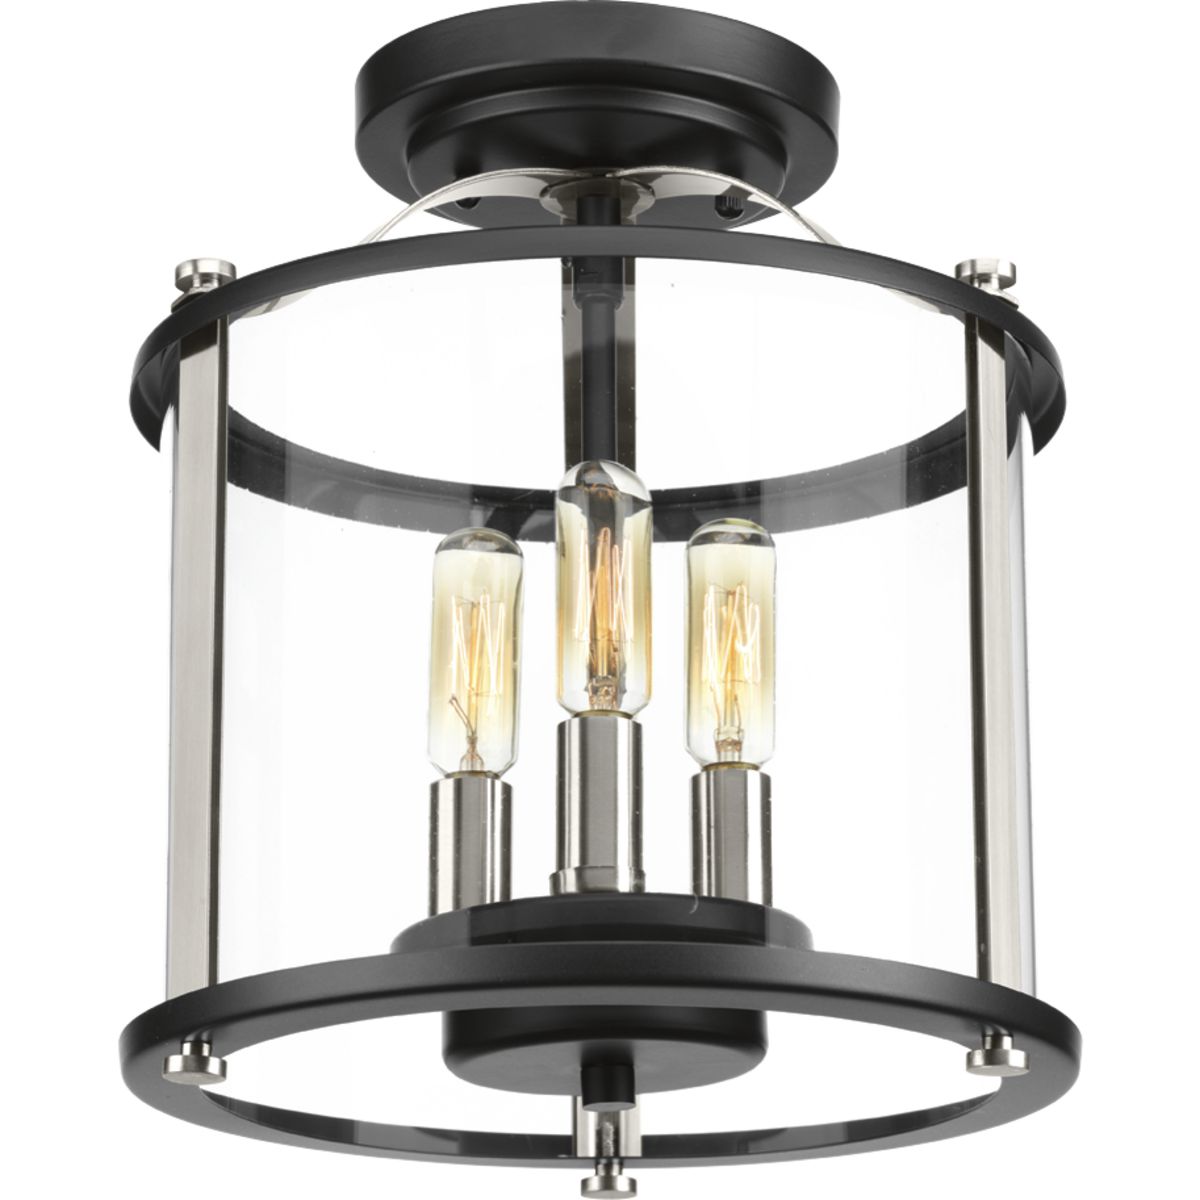 Squire three light  semi-flush convertible lantern features a classic traditional profile with clean, modern metal fittings. The Black finish is accented with contrasting Stainless Steel metallic elements, the cylindrical frame is comprised of a clear glass diffuser.